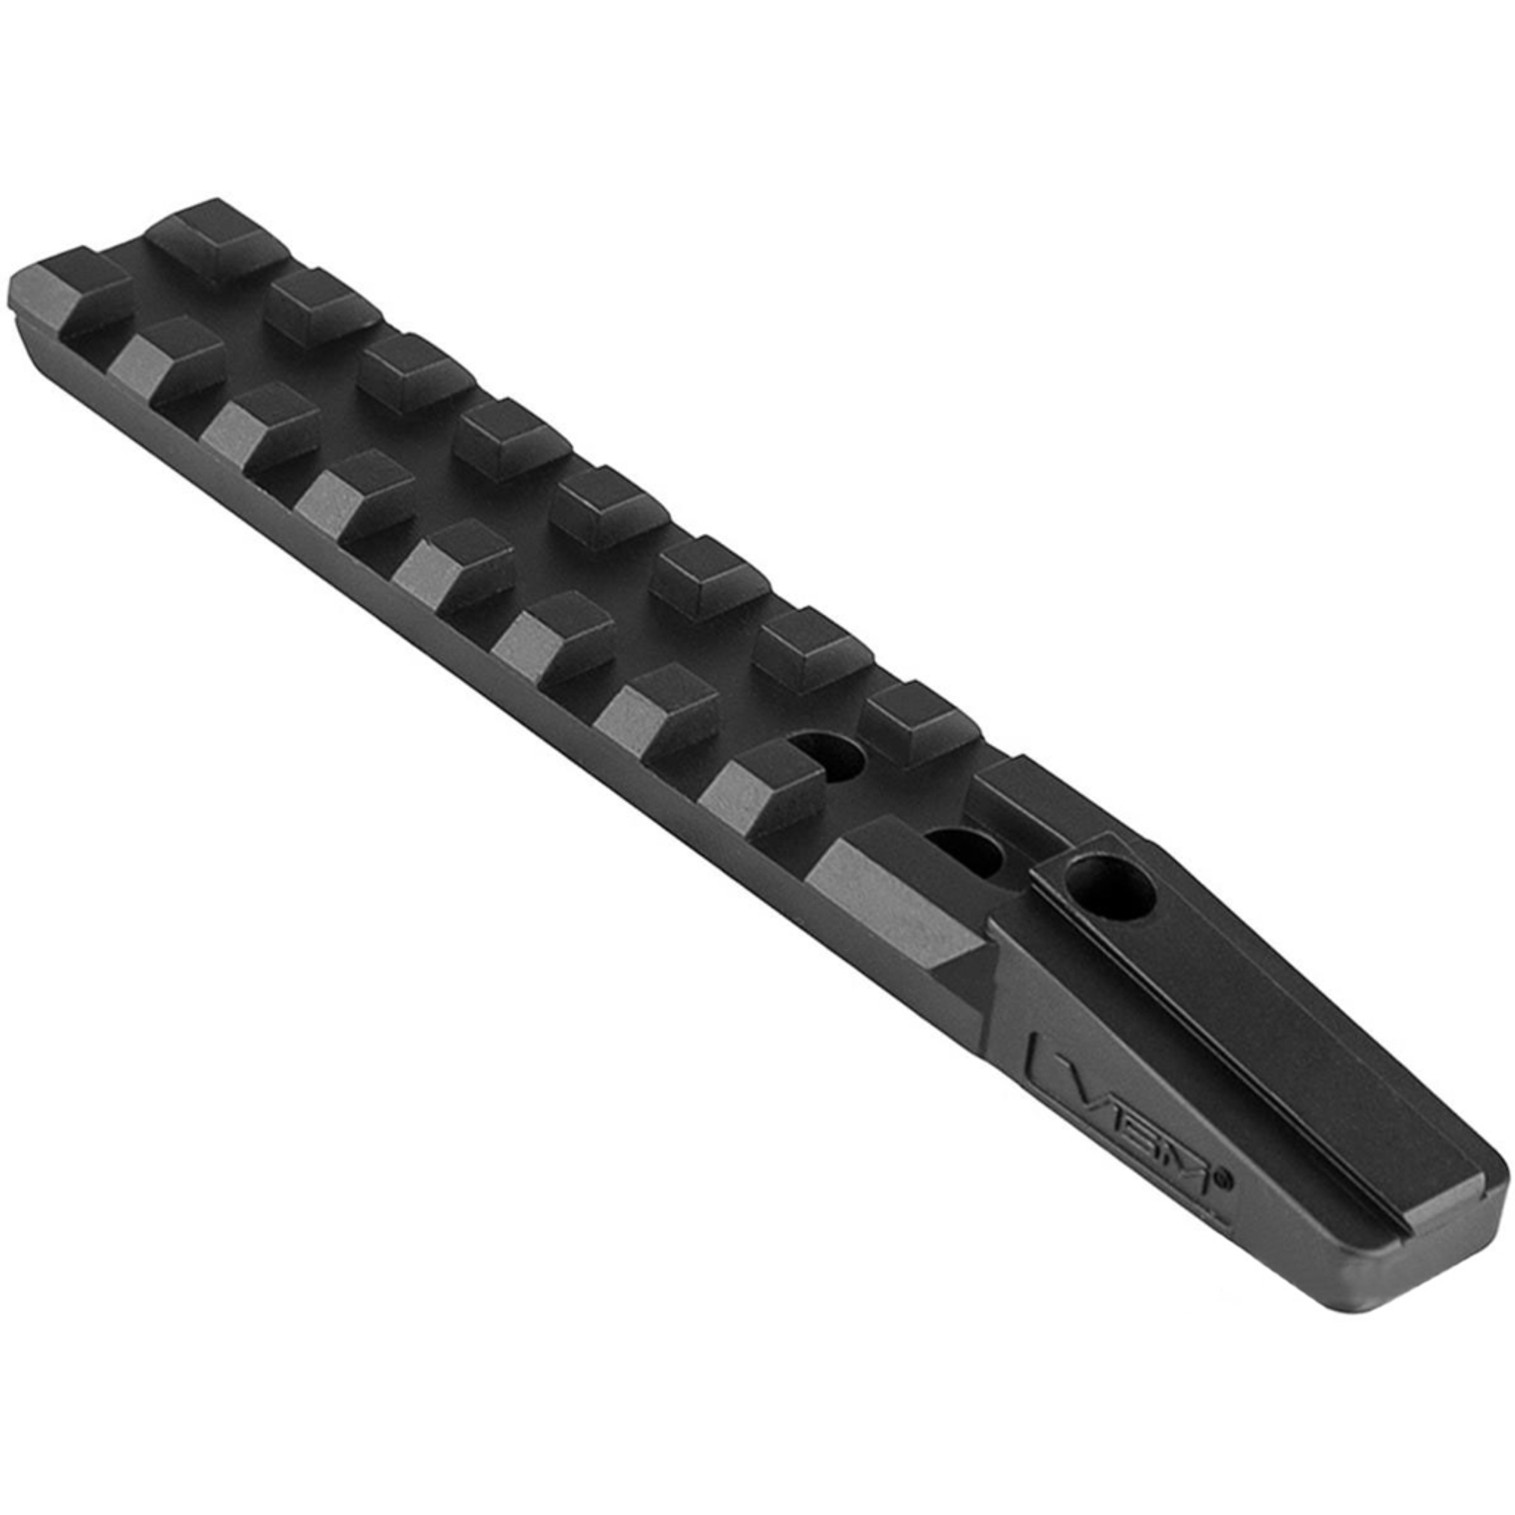 VISM by NcStar Picatinny Rail and Rear Sight Base for Ruger PC Carbine (Color: Black)